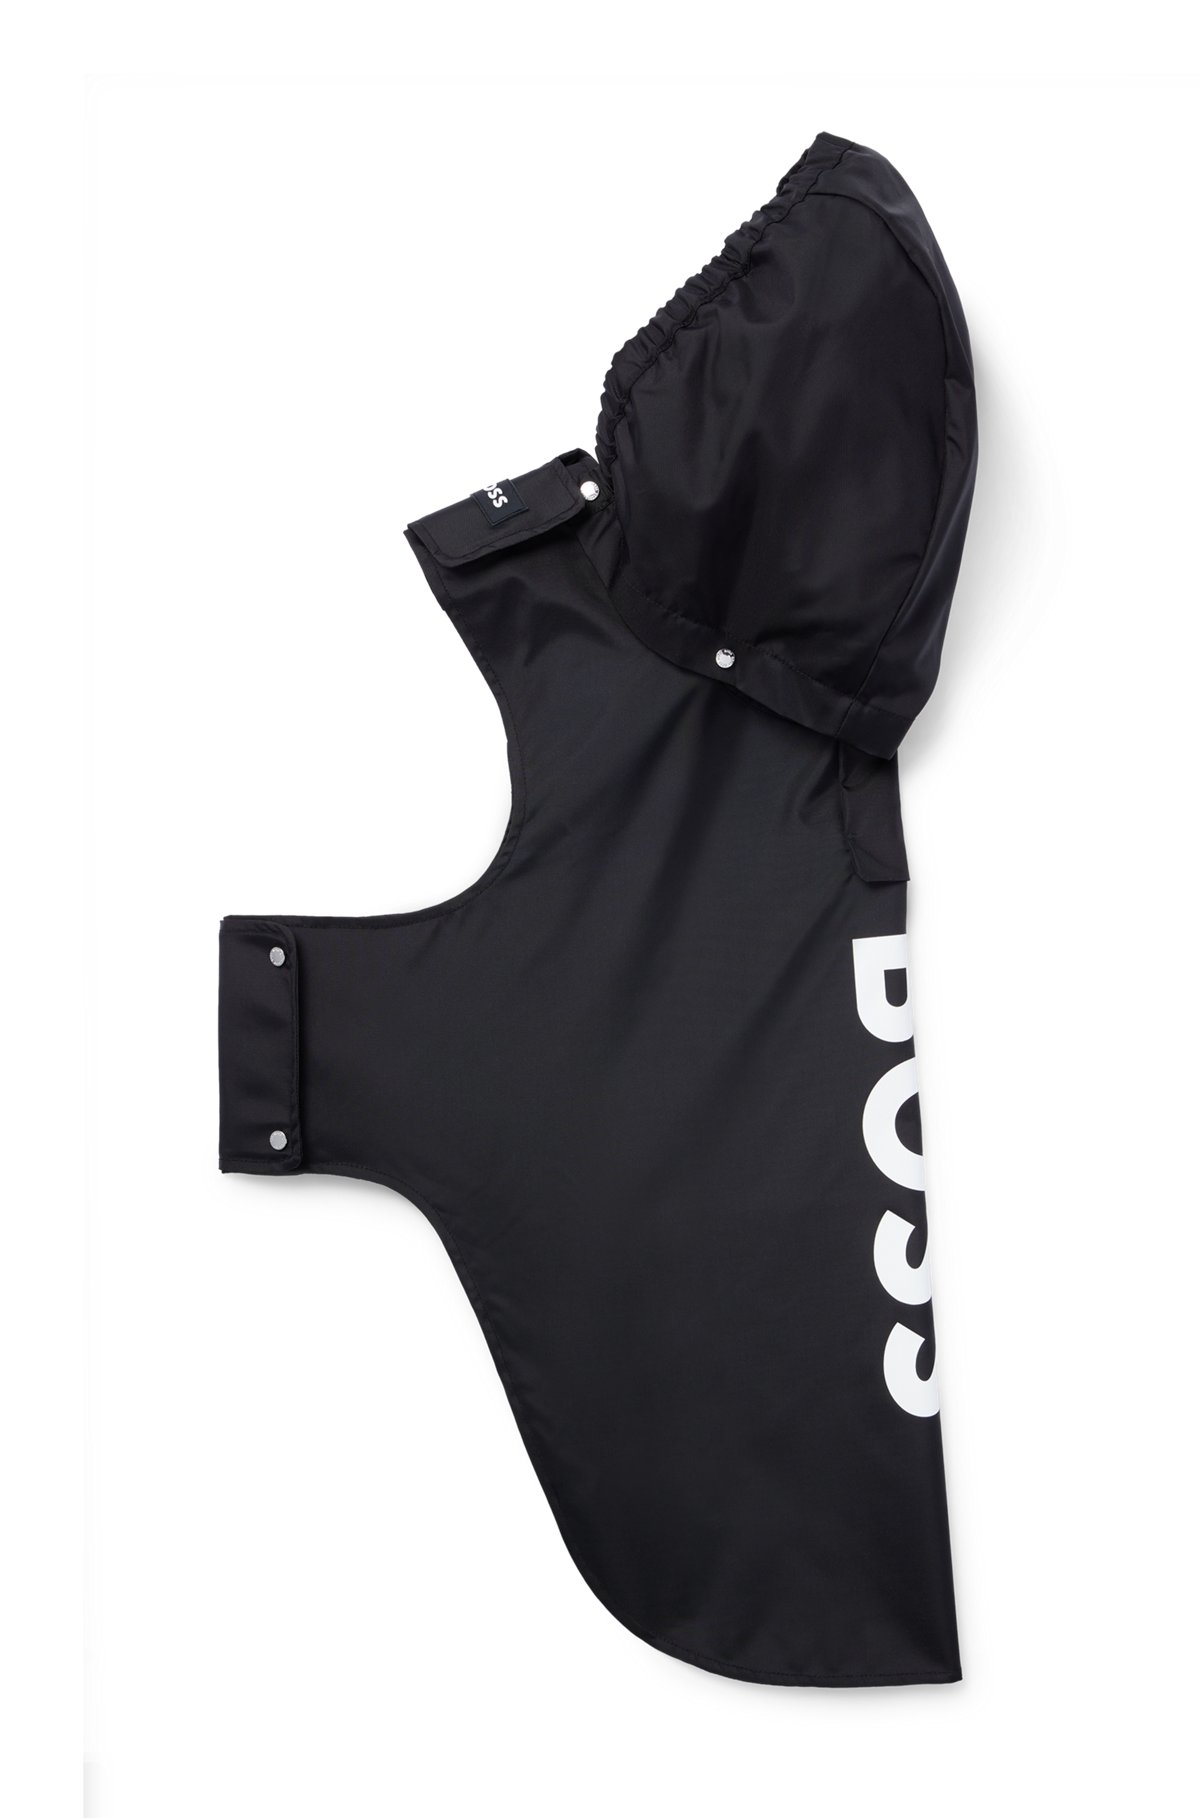 Dog raincoat in waterproof fabric with contrast logo, Black